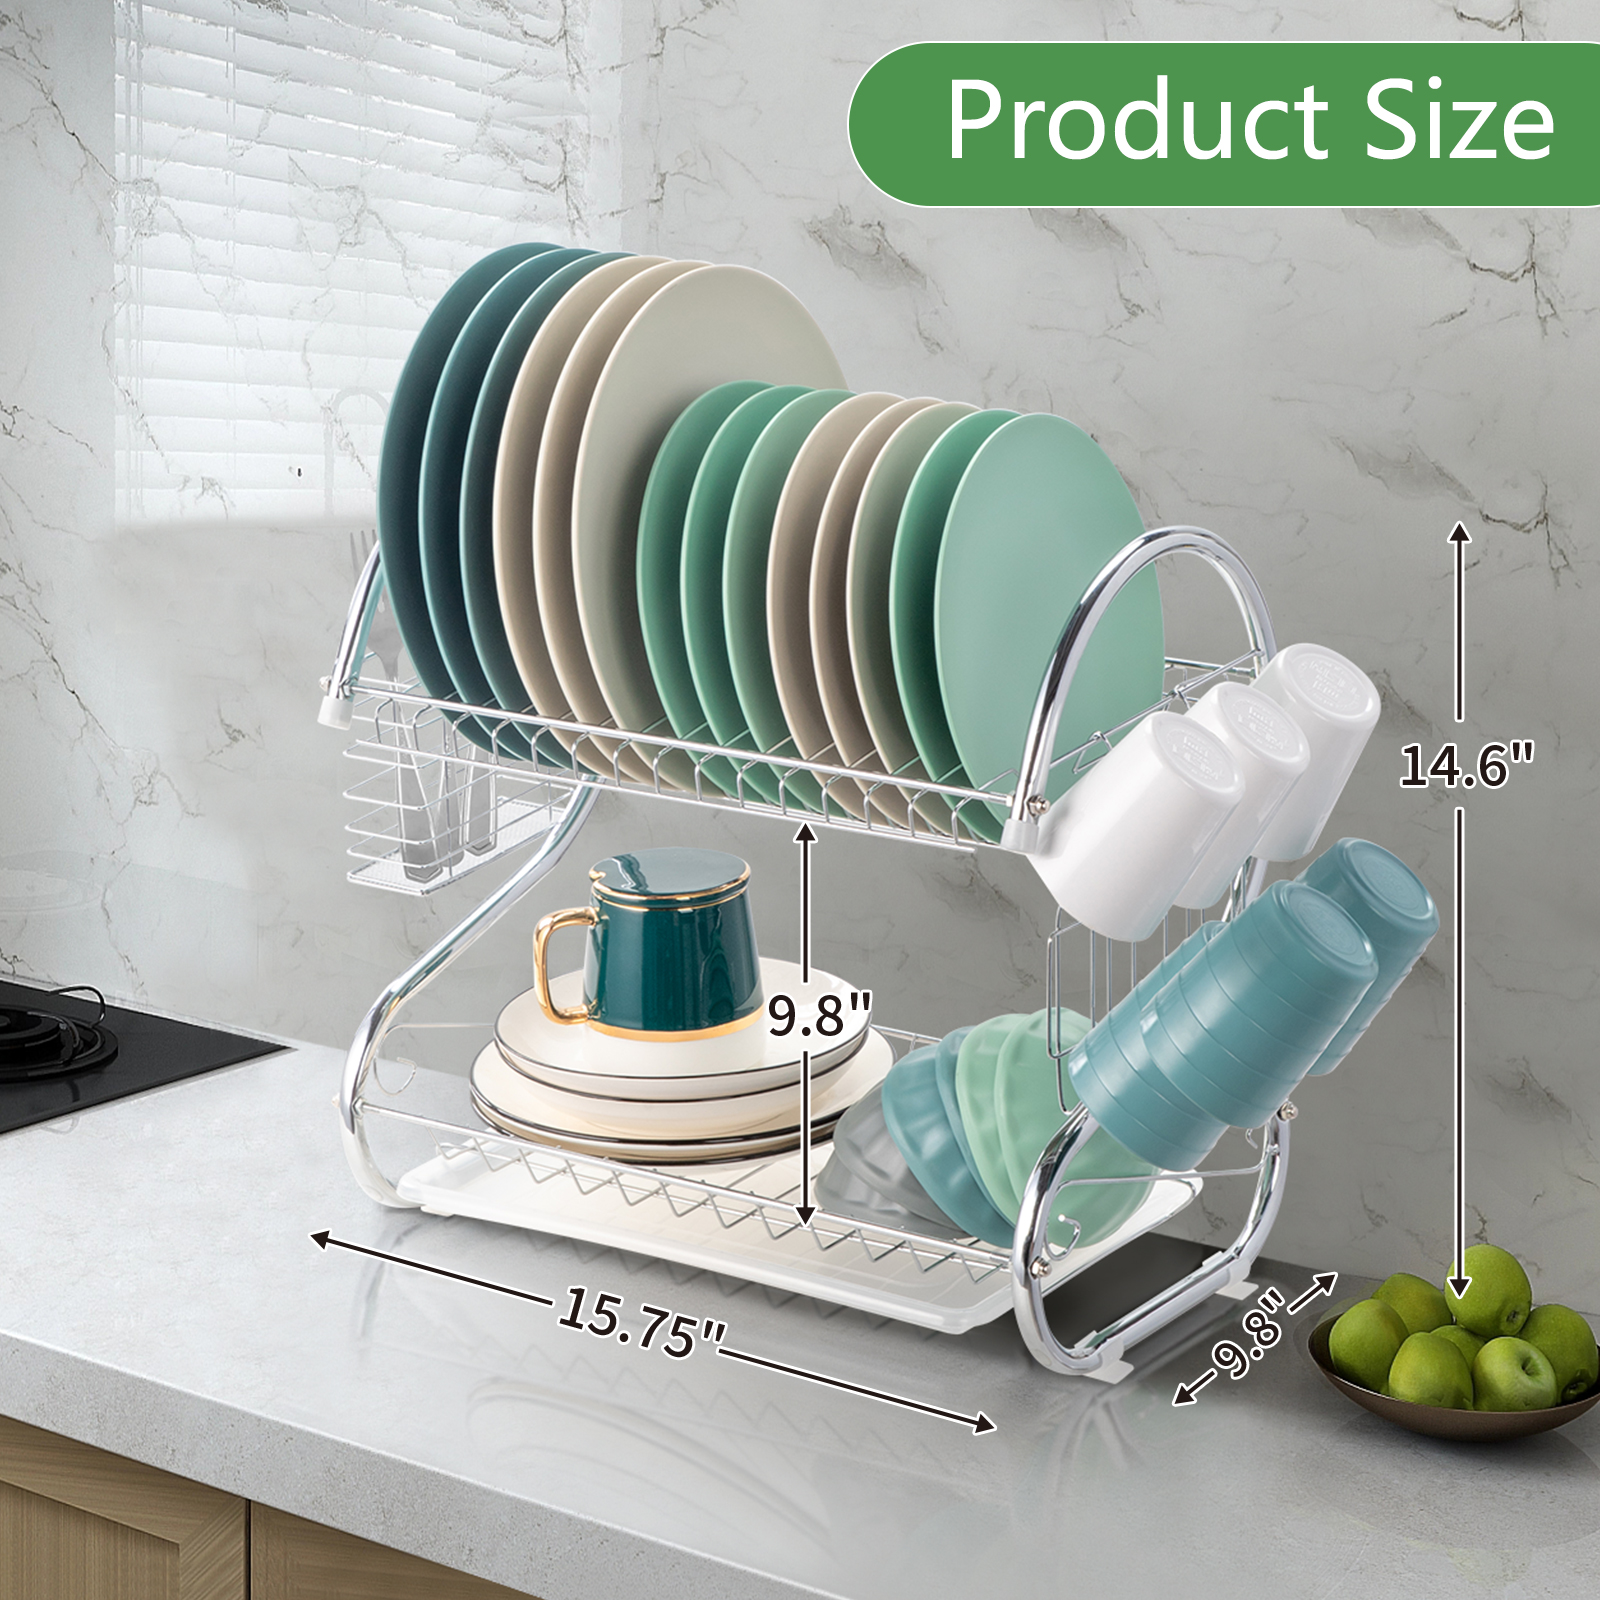 Ktaxon Kitchen Stainless Steel Dish Cup Drying Rack Holder 2-Tier Dish Rack Sink Drainer - image 4 of 11